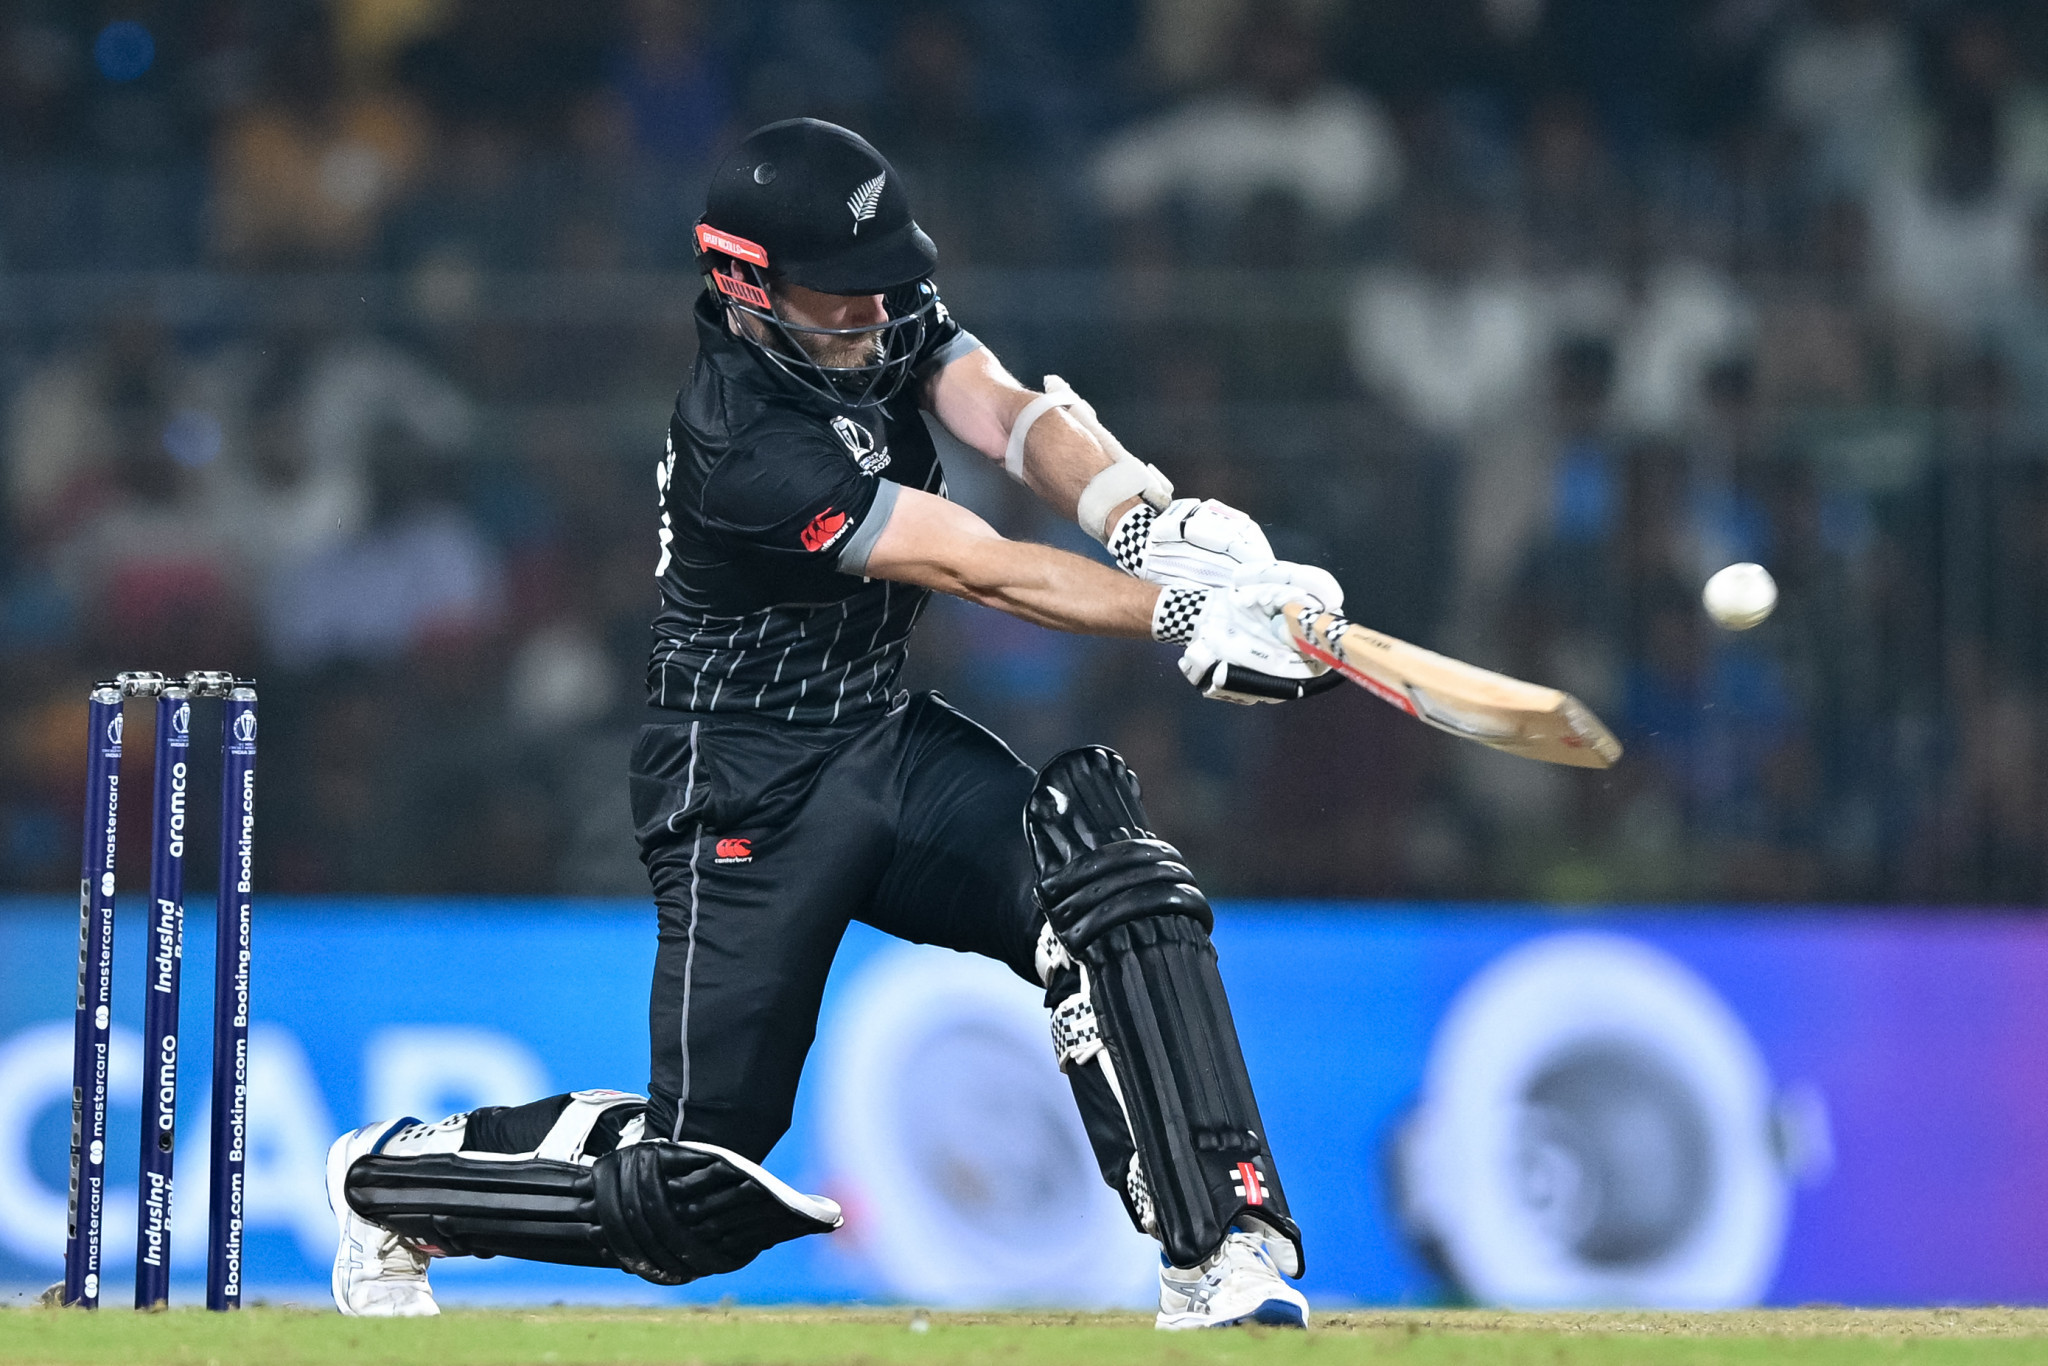 New Zealand cruise to Cricket World Cup victory against Bangladesh